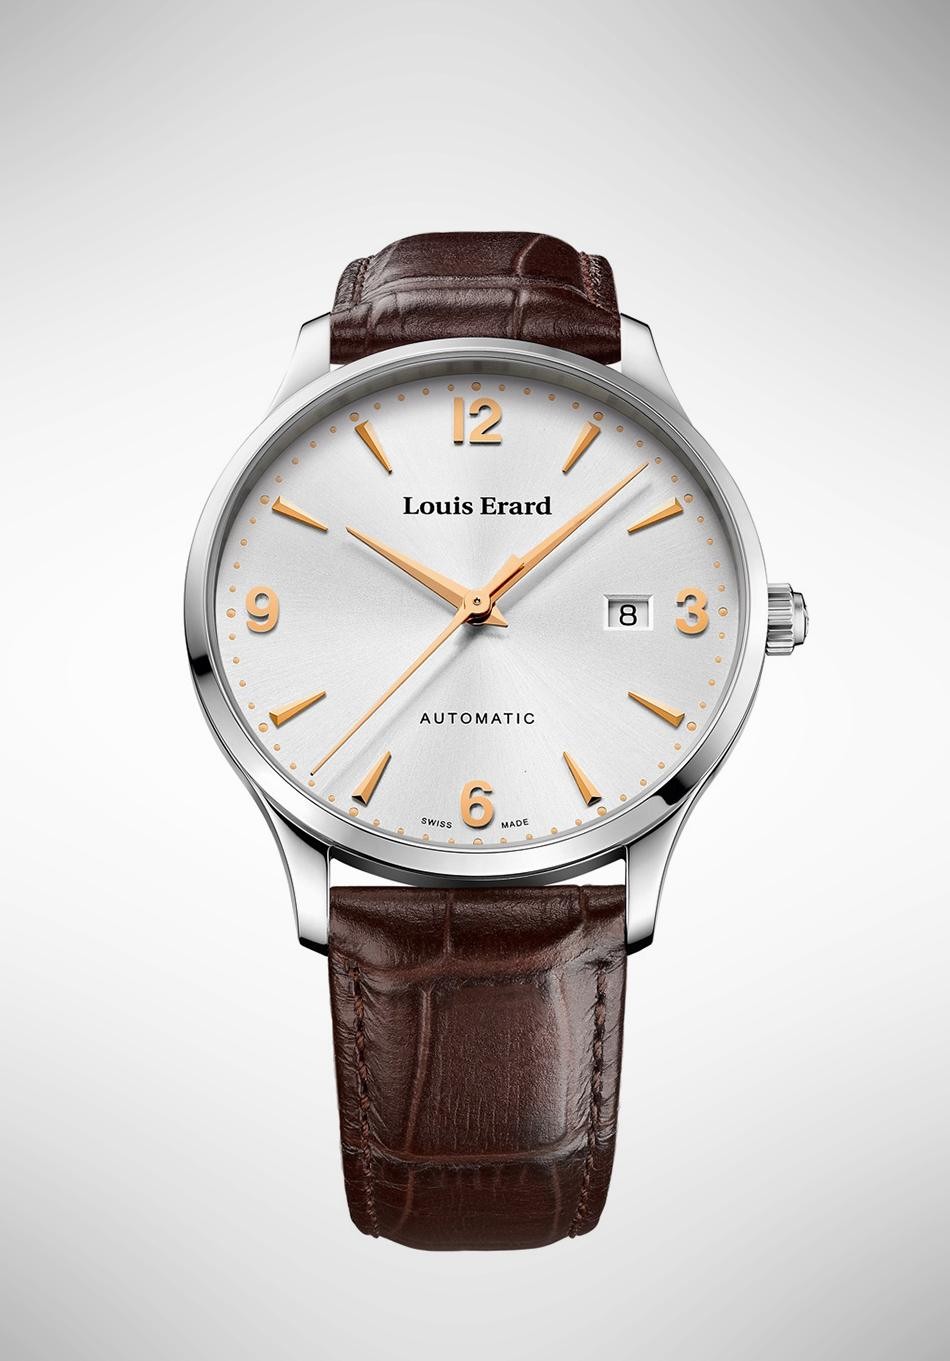 Louis Erard Re-Intros the 1931 Chronograph in Gold